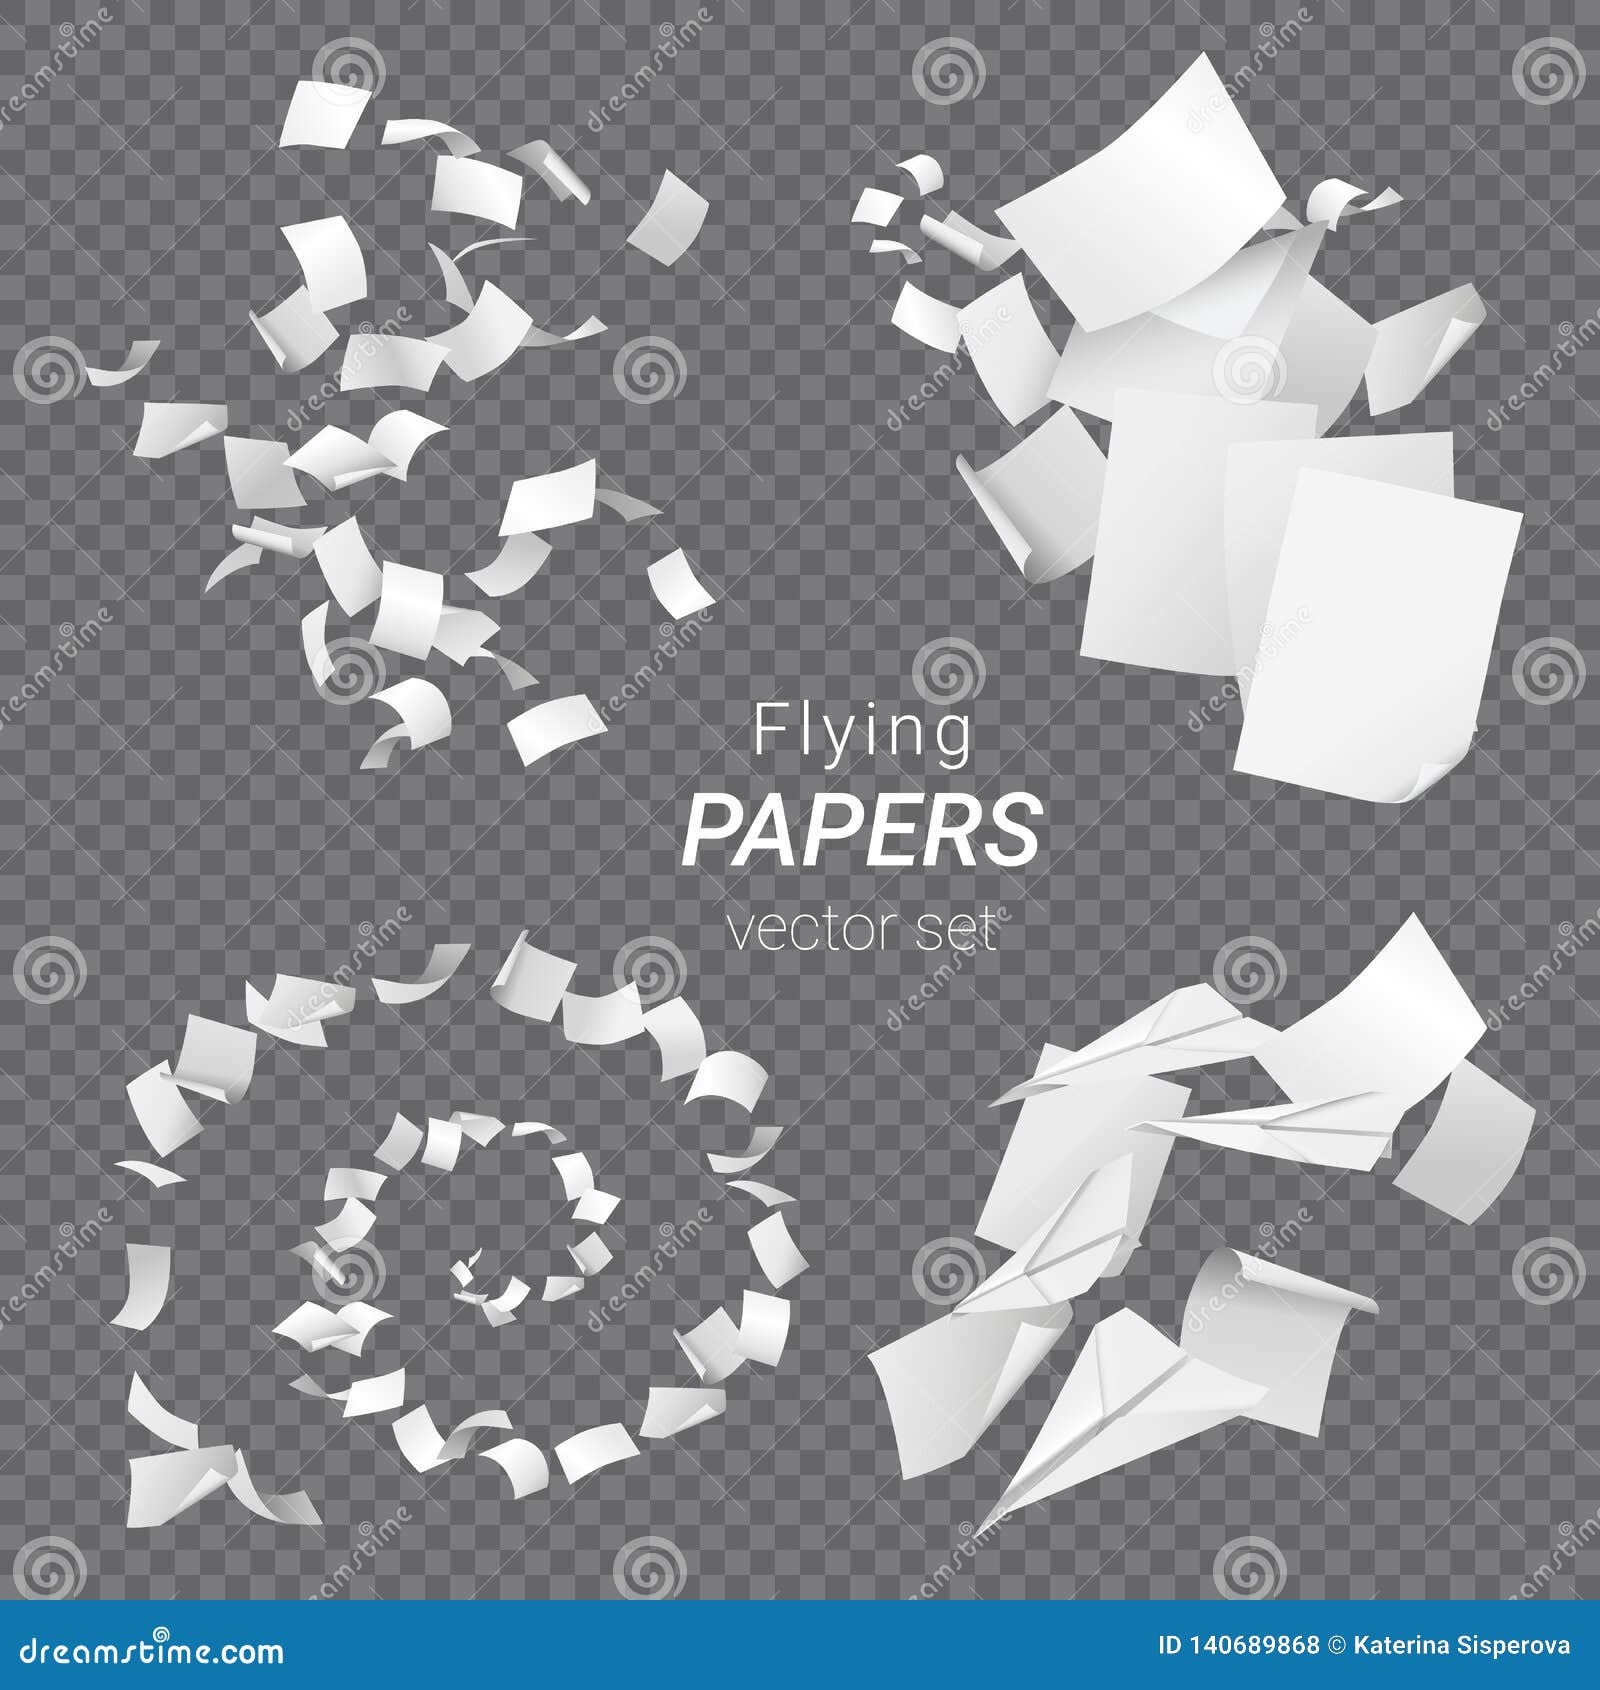  set of different groups of flying papers and paper planes  on transparent background